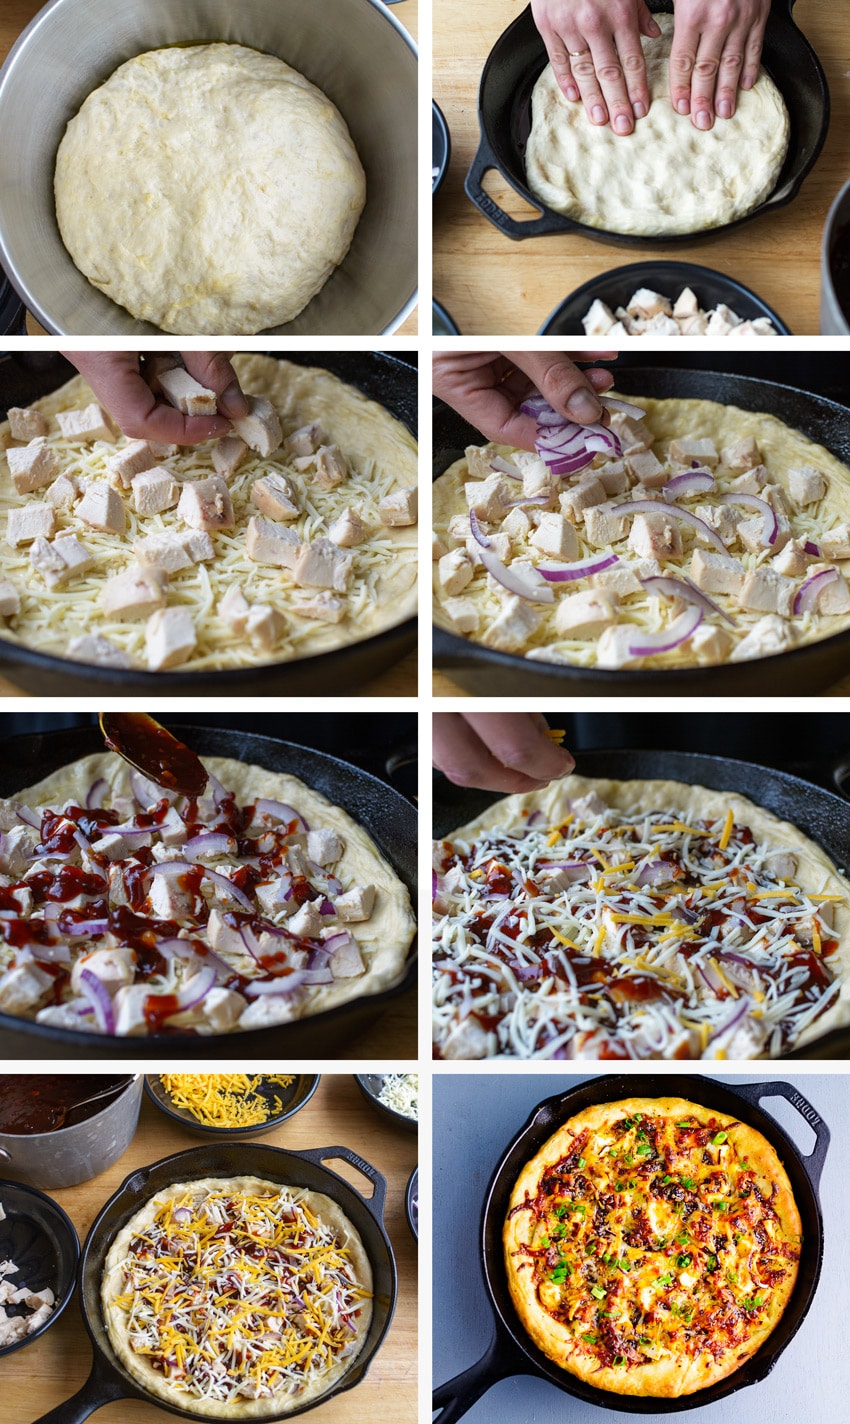 How to Make Easy Homemade BBQ Chicken Pizza from Scratch